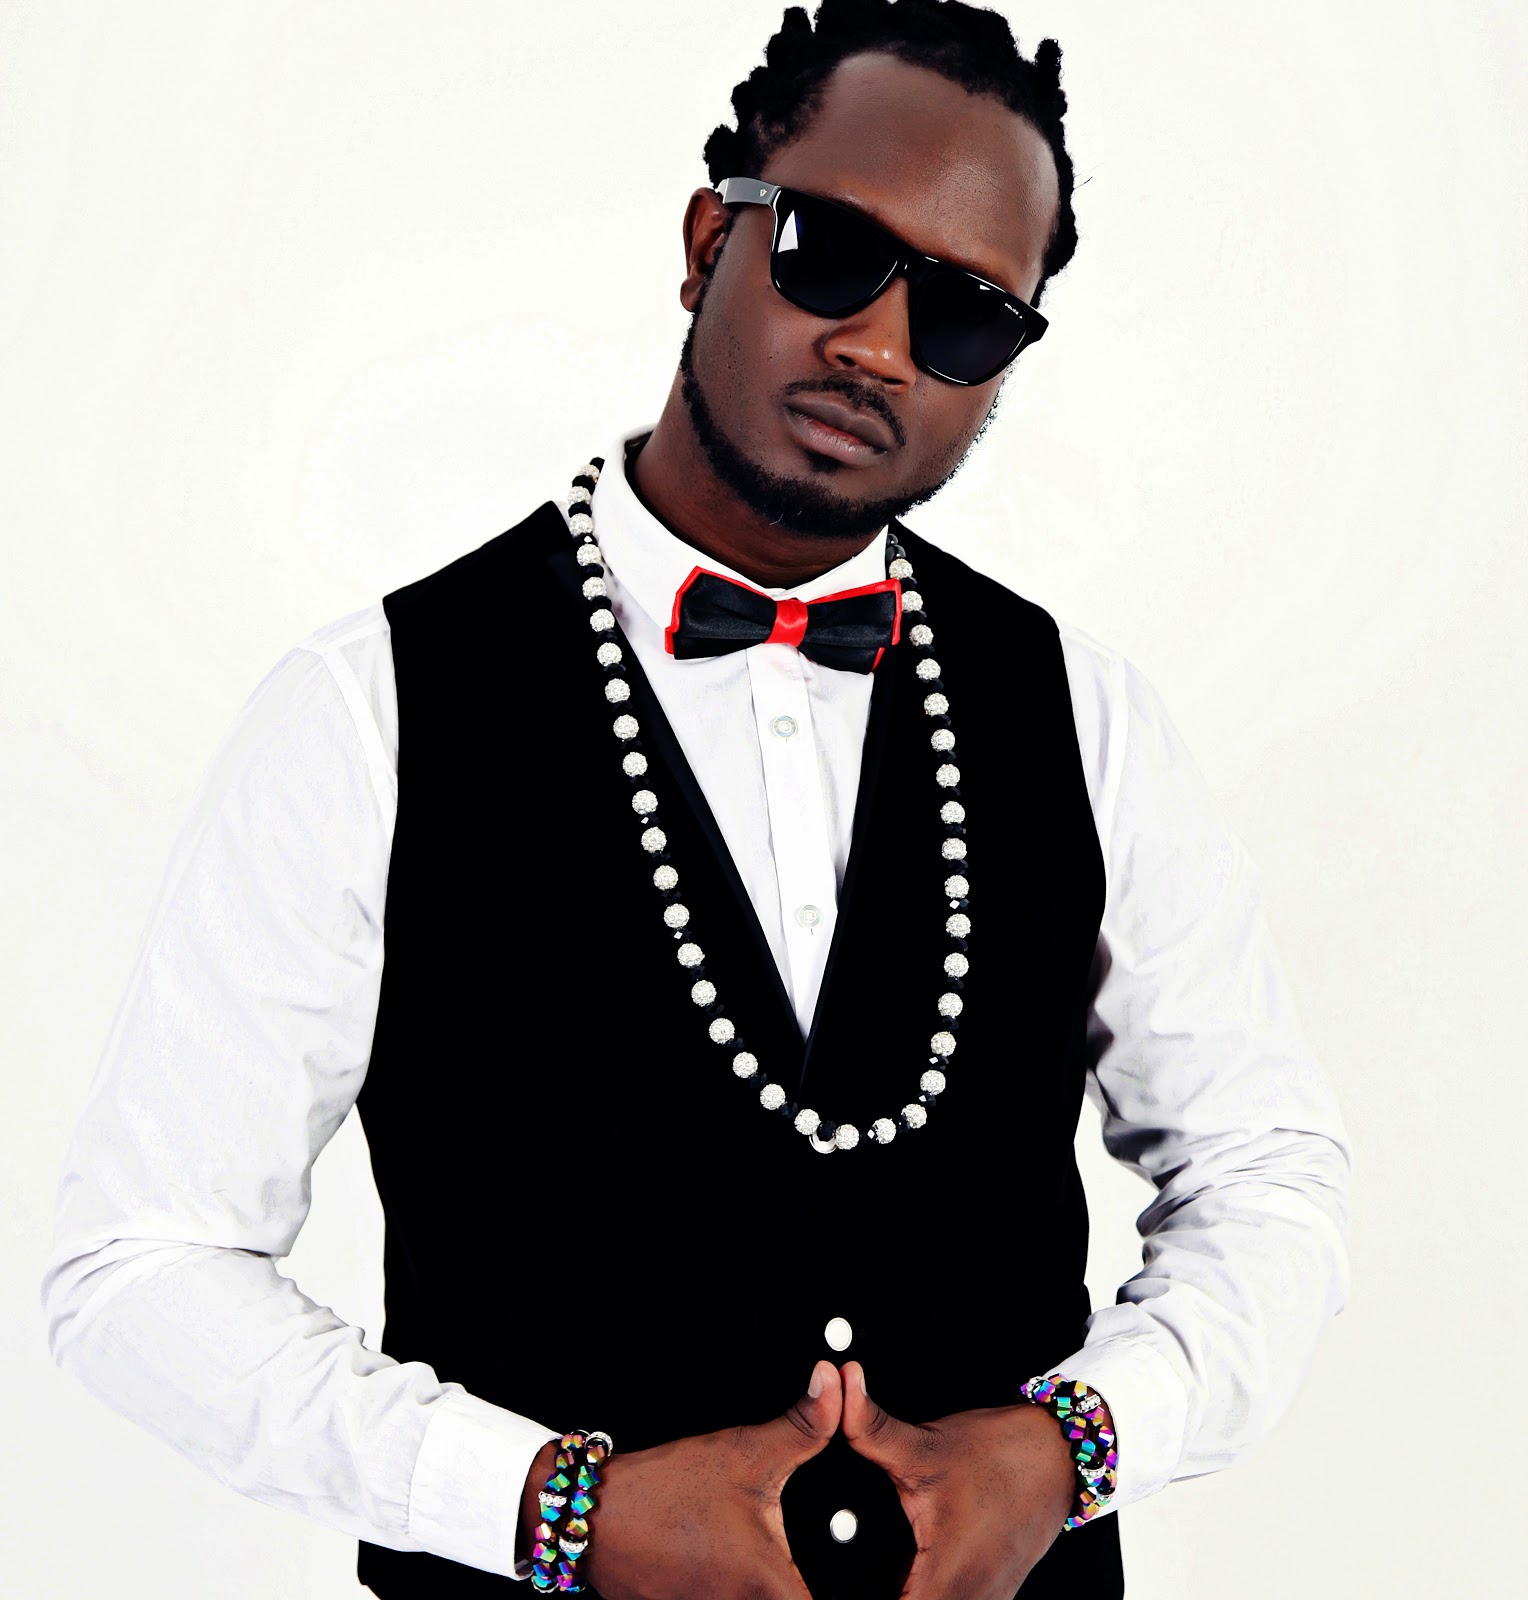 Bebe Cool Plans on Shooting New Videos from USA - Spur Magazine